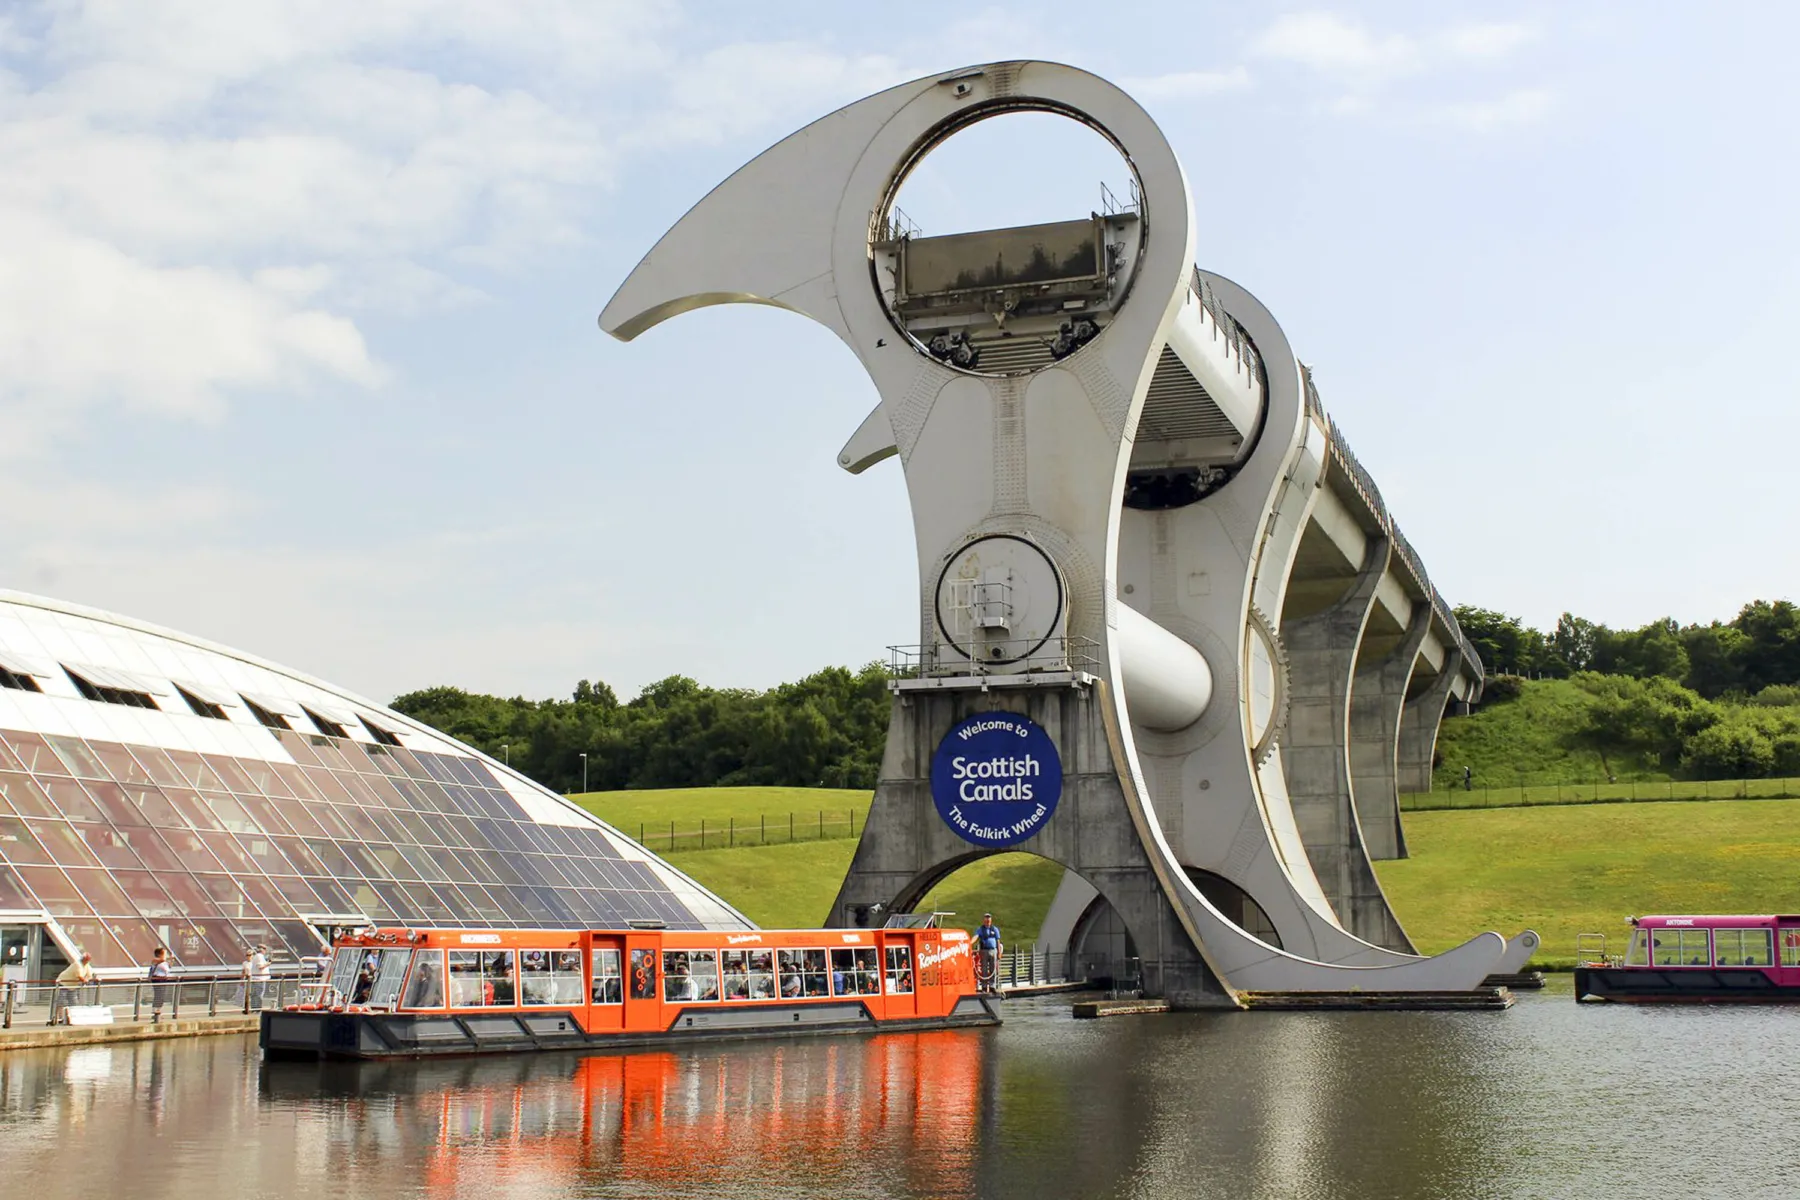 The Falkirk Wheel with canal boat in the basin.